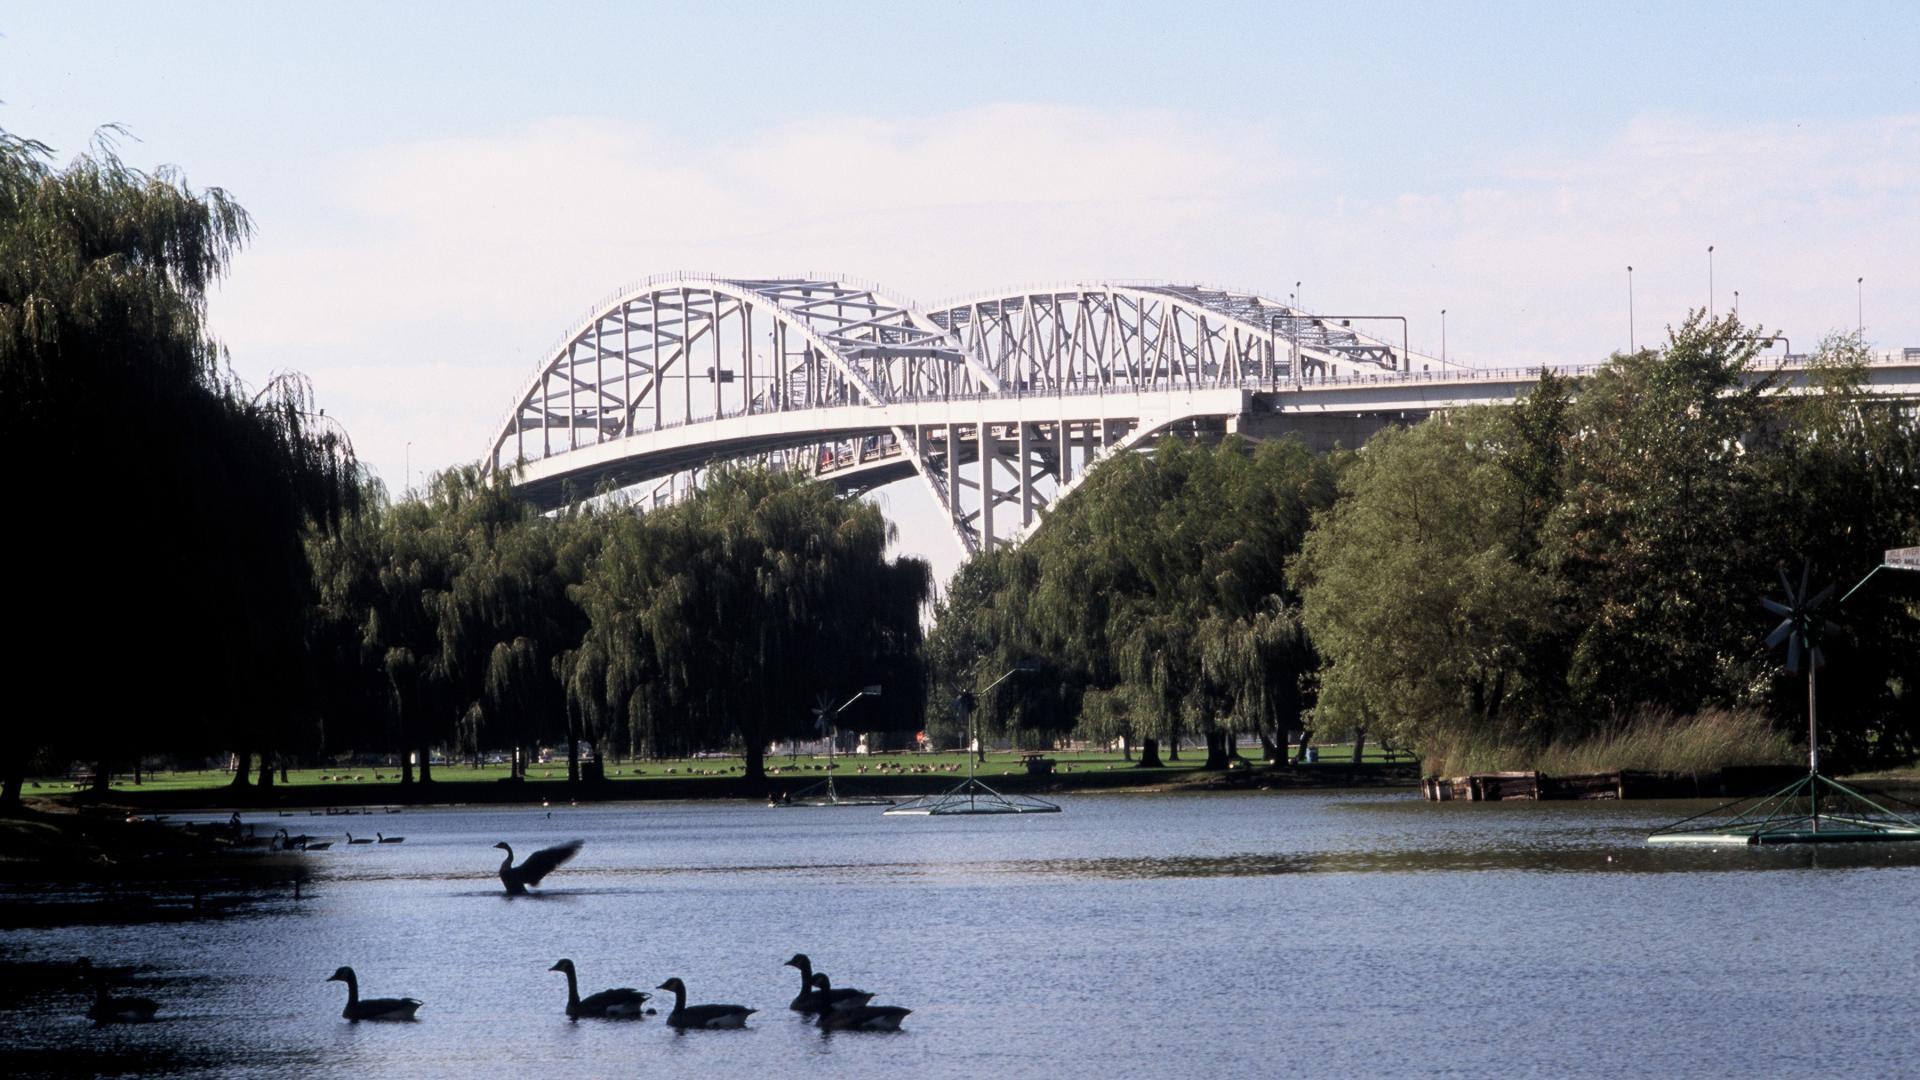 Landscape shot with bridge in the background. There are geese on the water in the foreground.